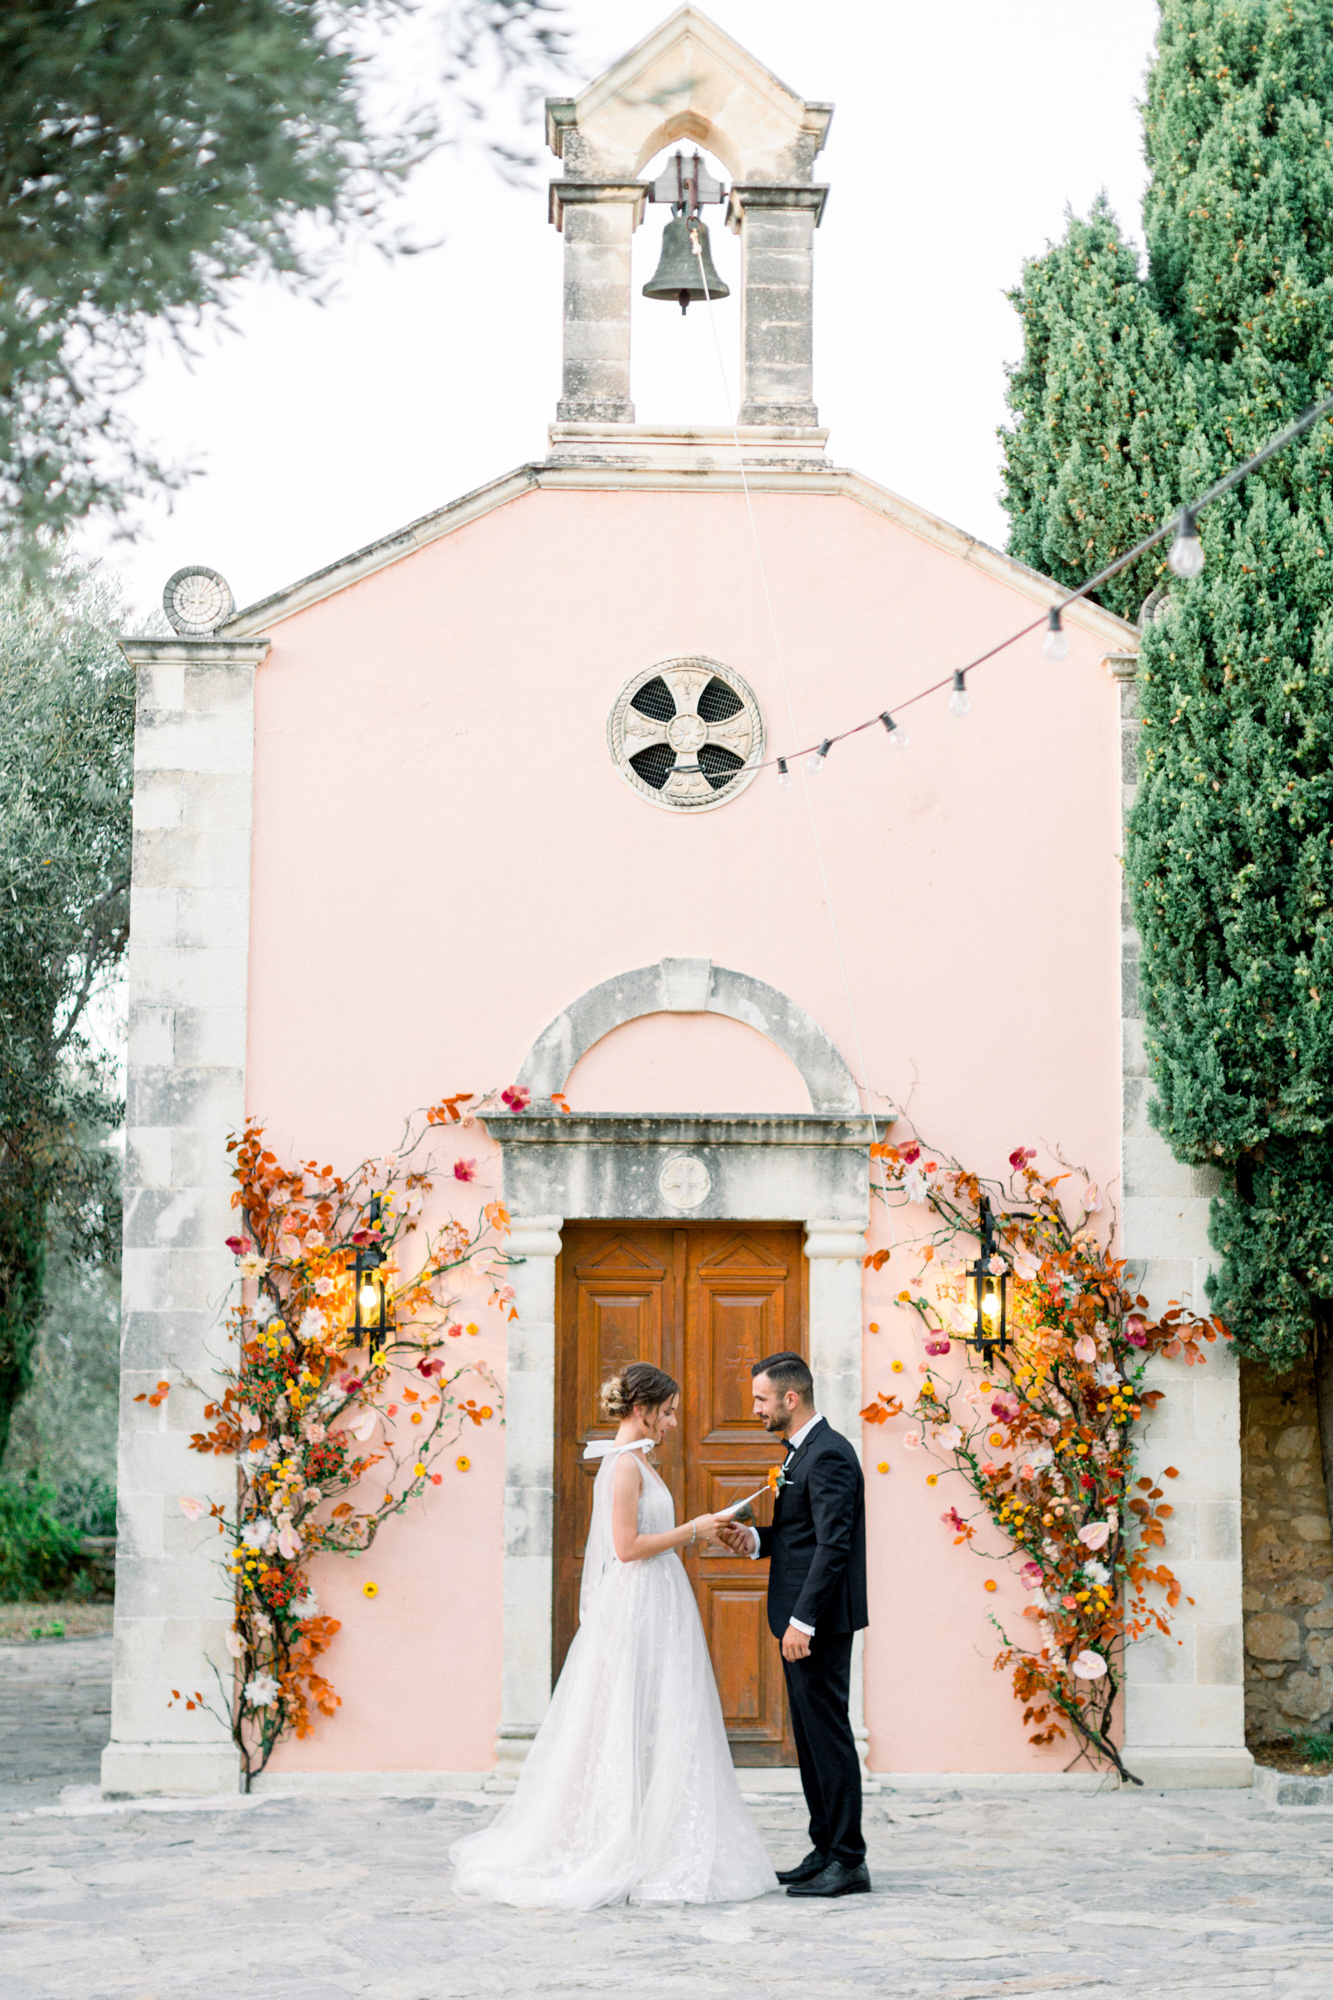 Microwedding ceremony at a sunset wedding editorial in Grecotel Agreco Farms Crete Greece as published on Ruffled blog.